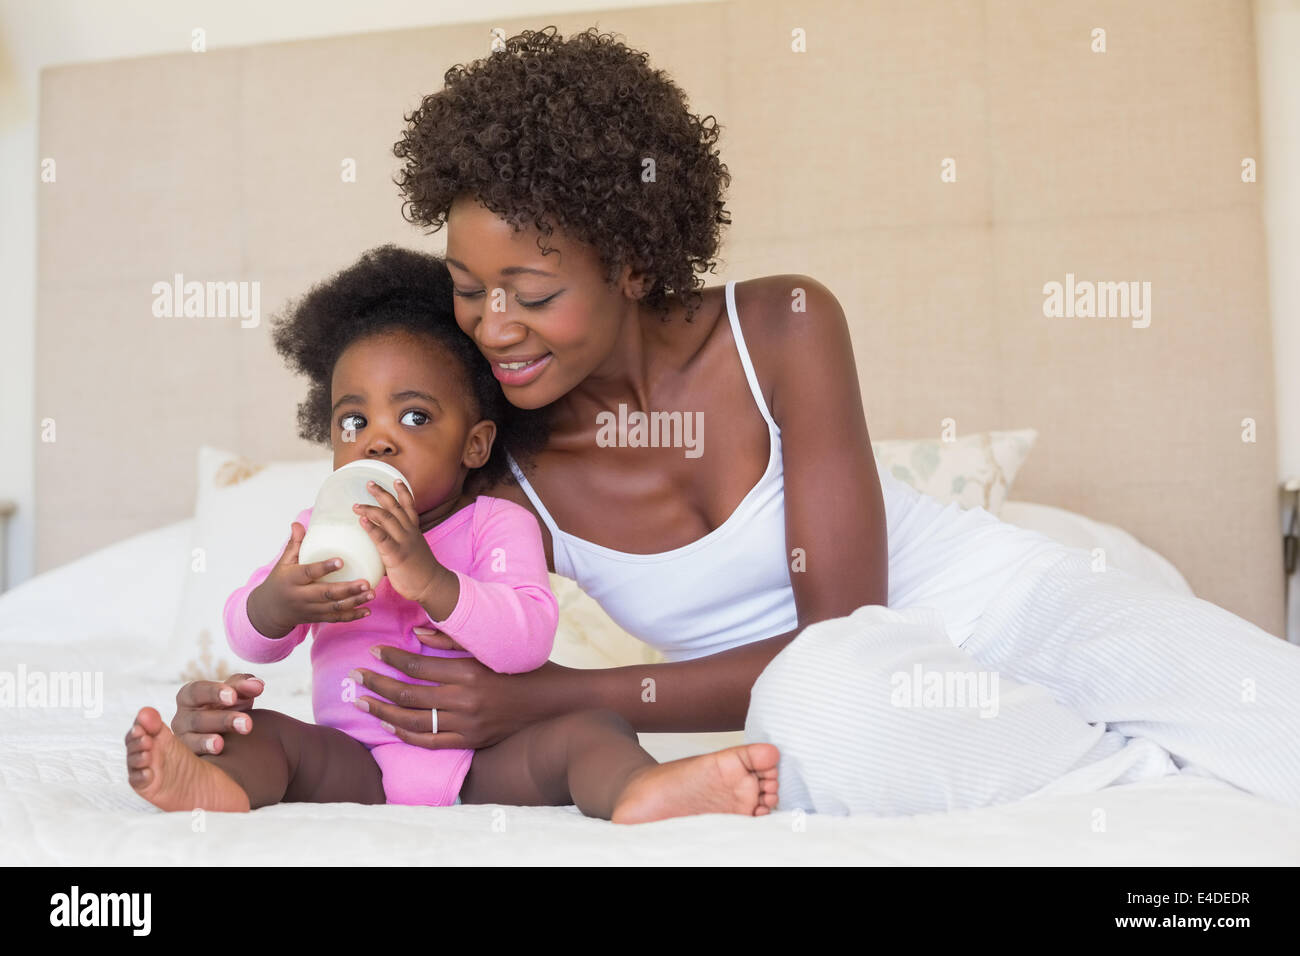 Happy parents with baby girl on their bed Stock Photo